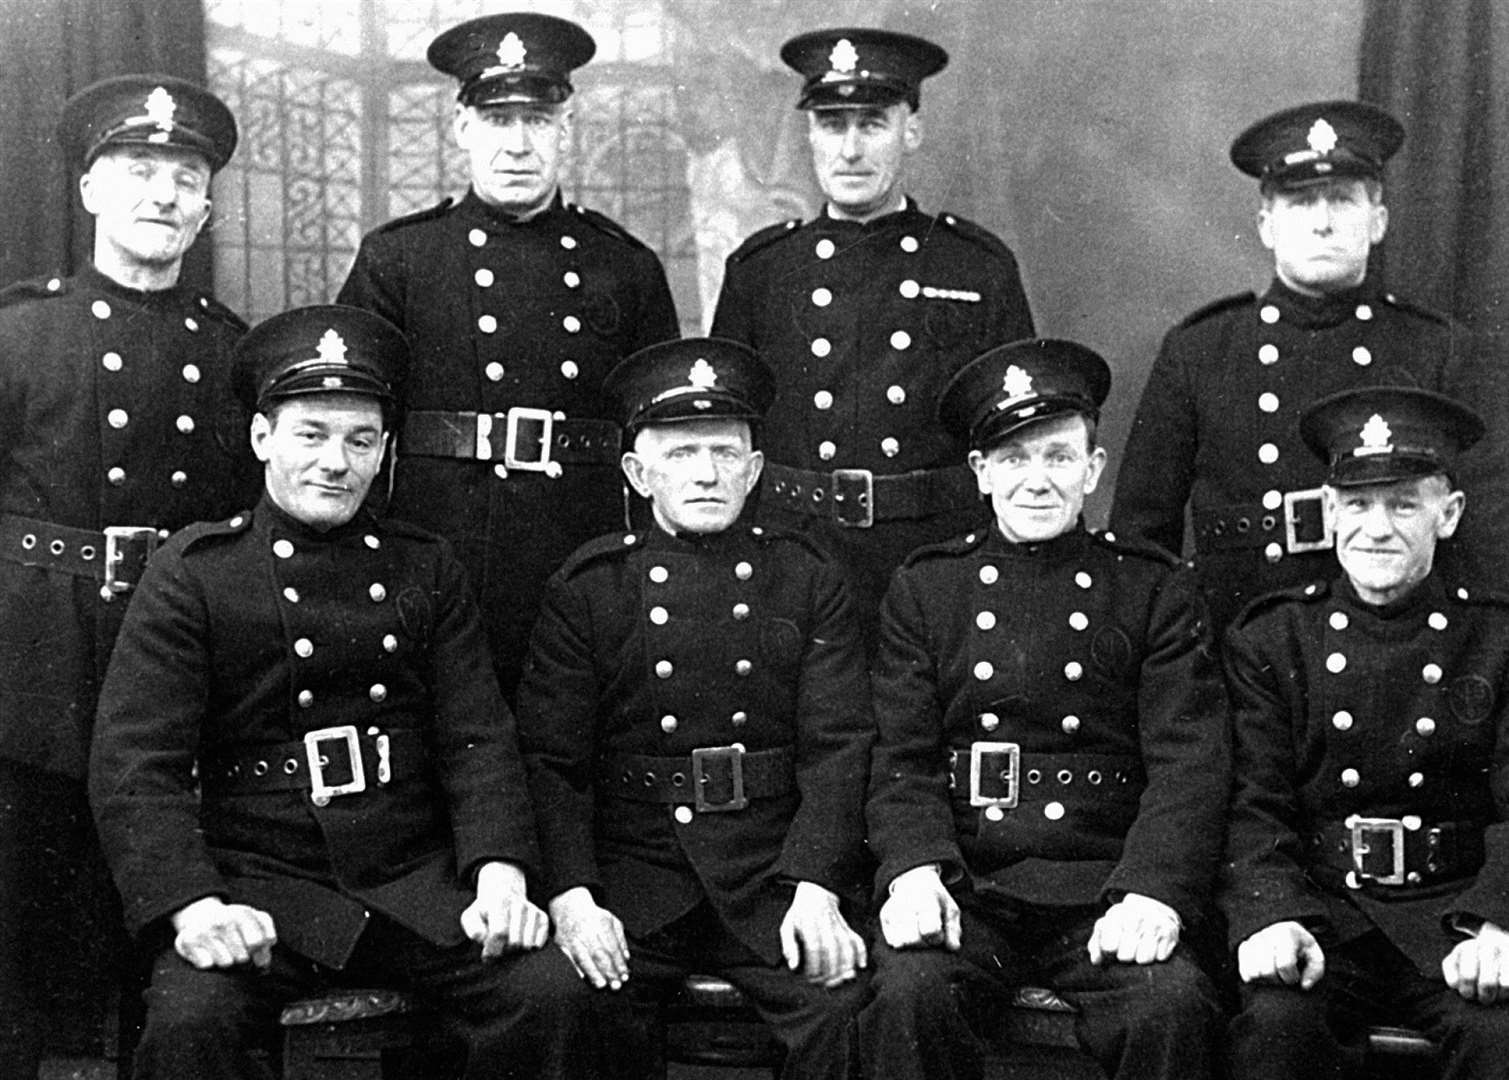 Lybster firemen in the early 1940s – (standing) G Sutherland, J Alex McDonald, A Oag, P Nicol; (seated) D Wares, D. Cormack, D Bain, J Mackay.